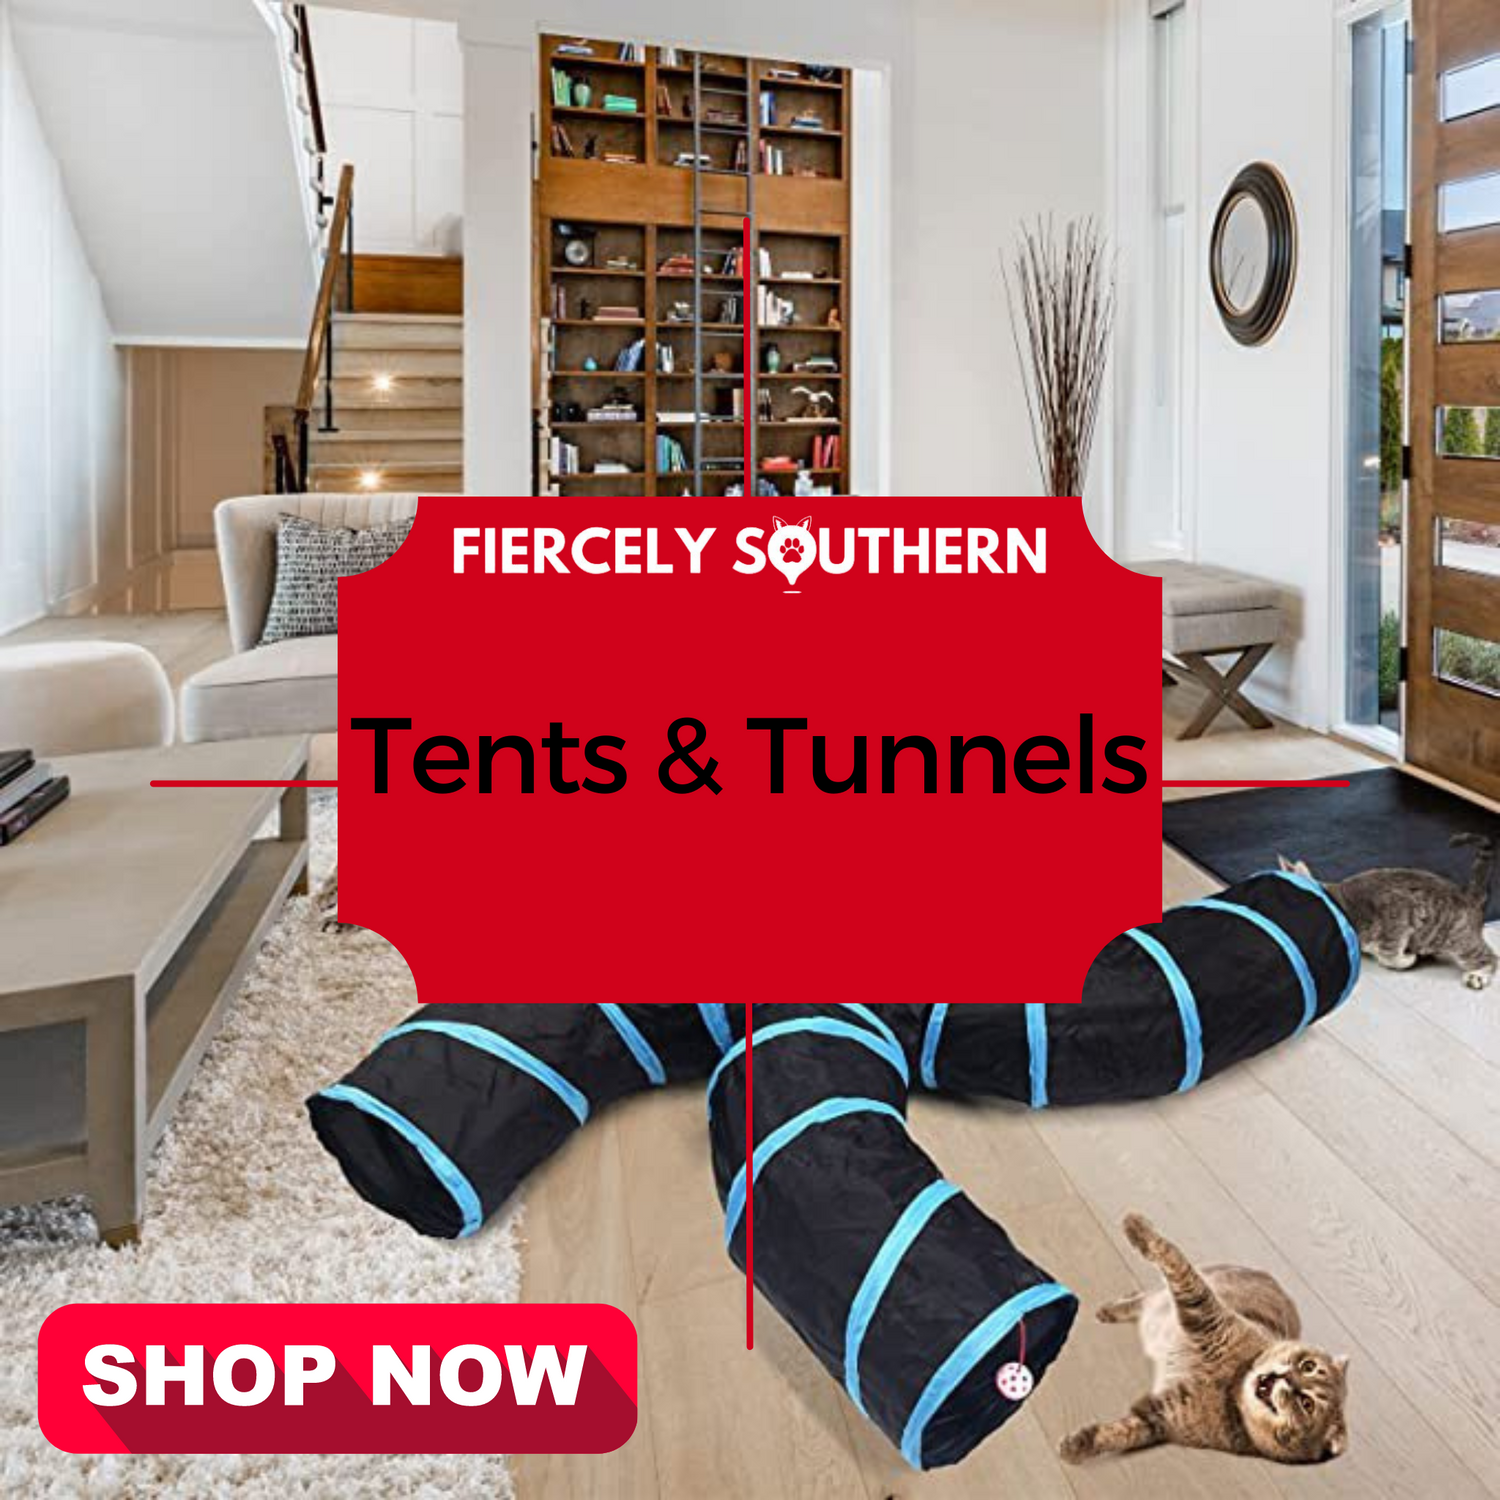 Tents & Tunnels - Fiercely Southern